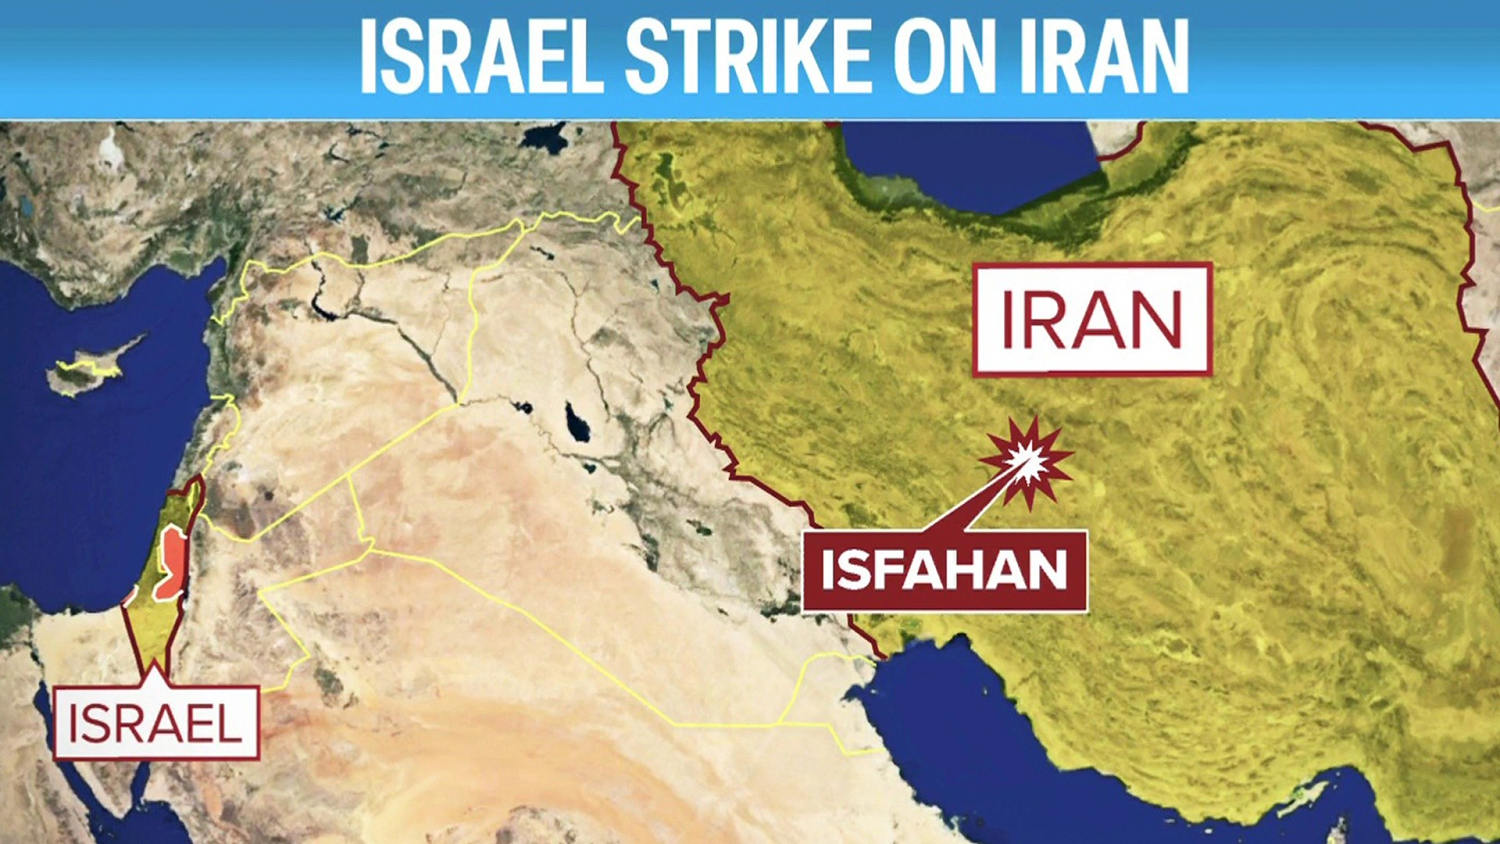 Israel strikes back on Iran: What is the significance of the attack?